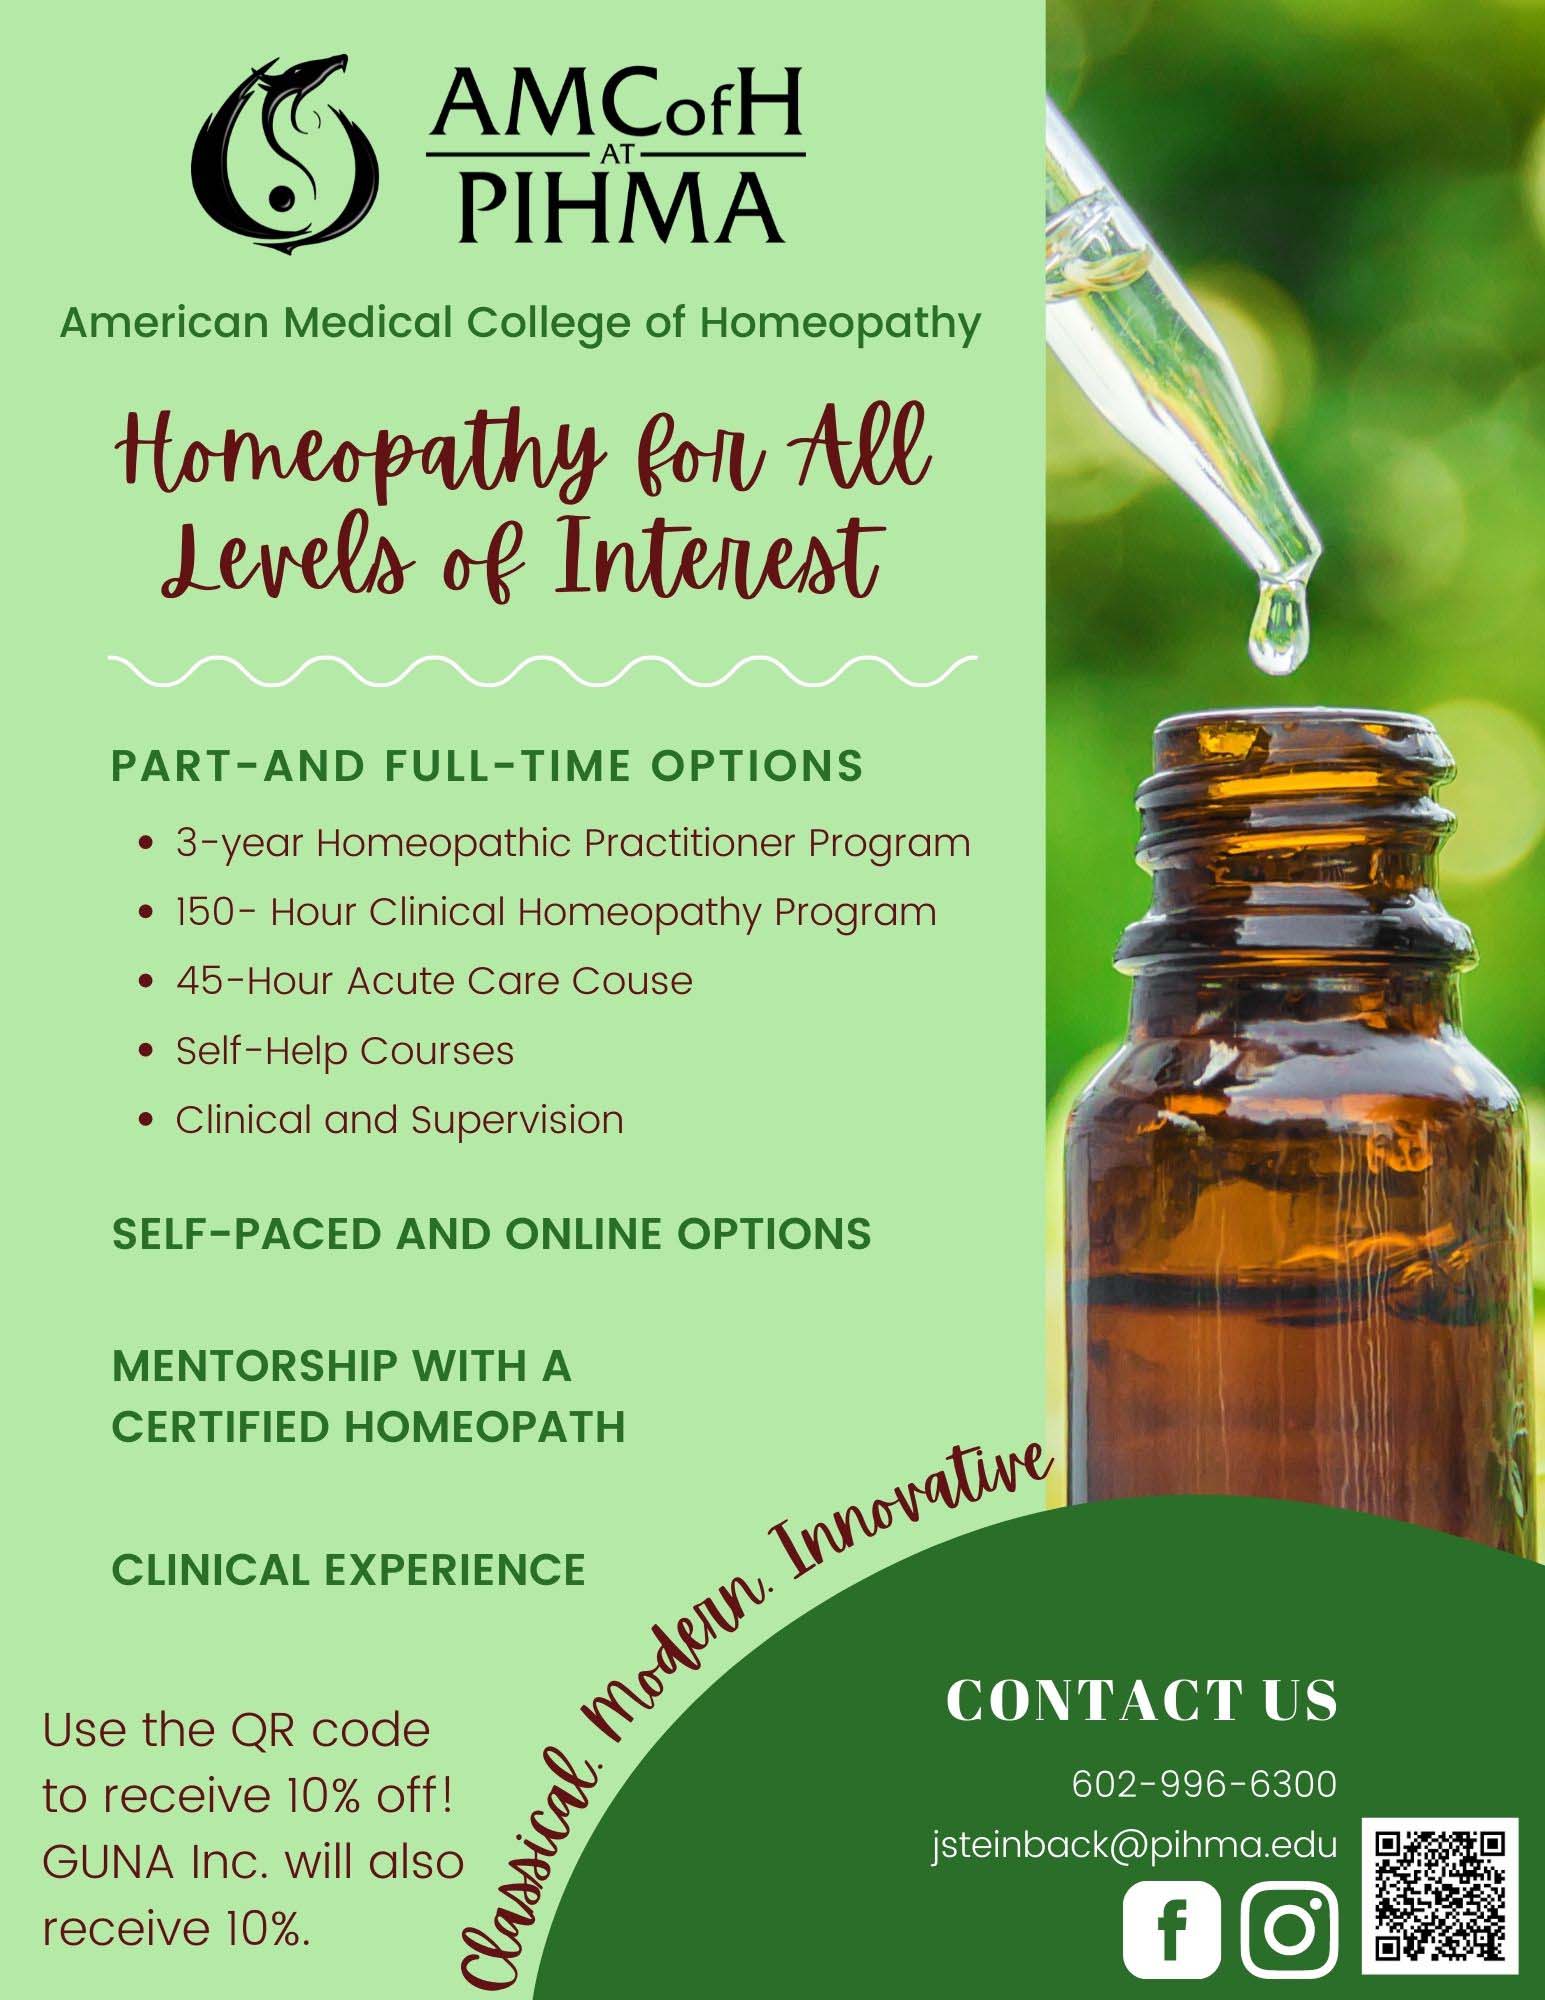 American Medical College of Homeopathy flyer